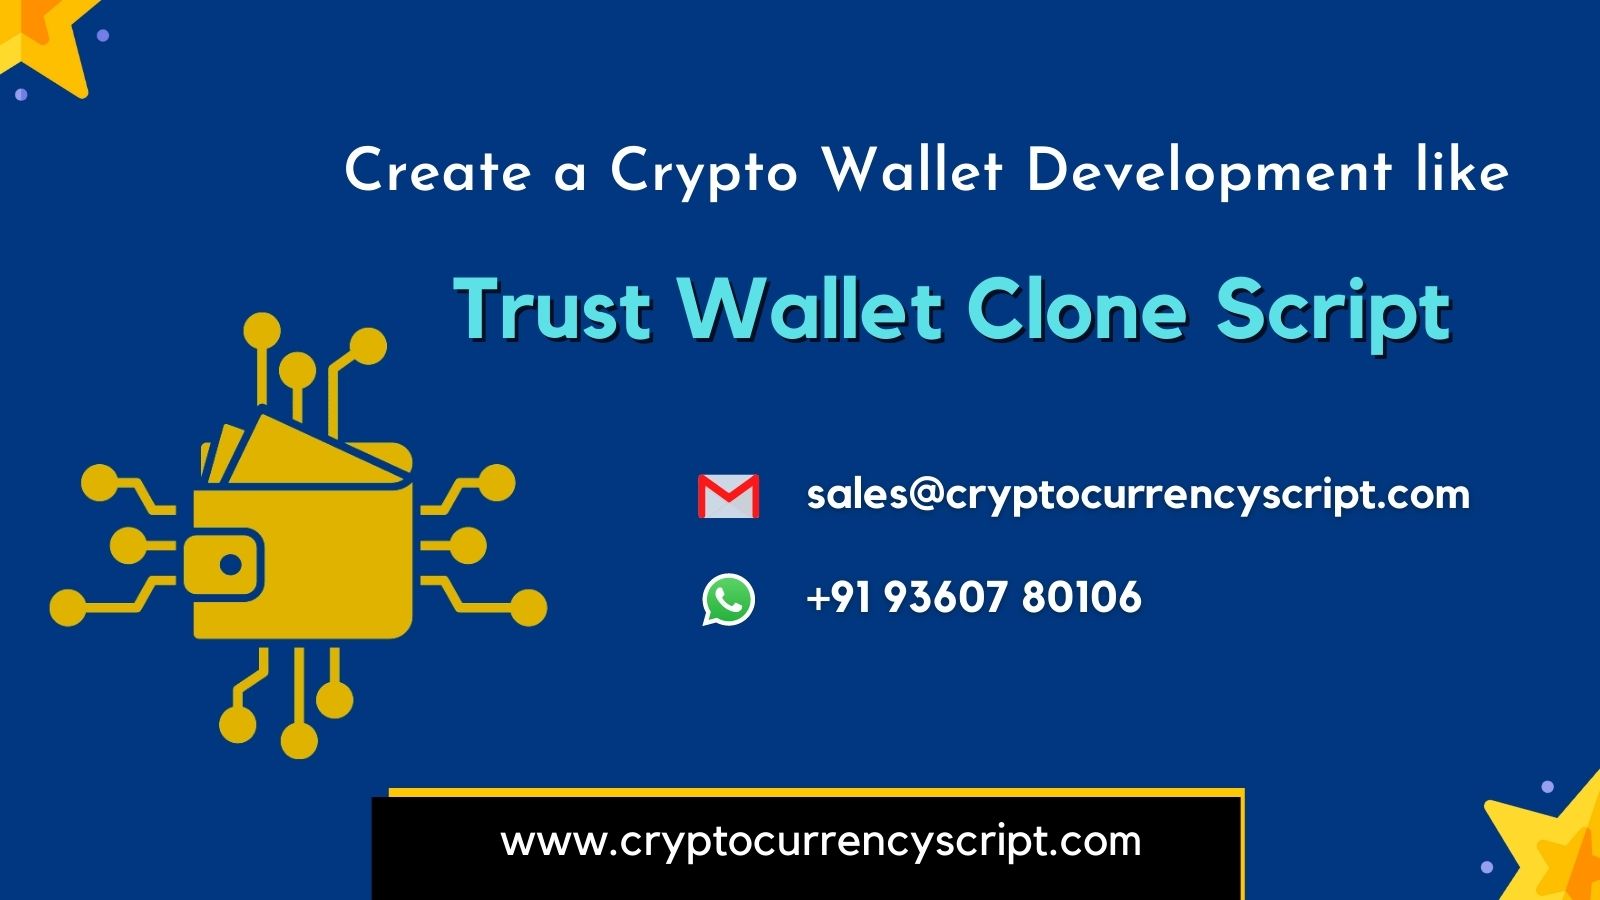 Get a free live demo from Zodeak’s Trust wallet clone